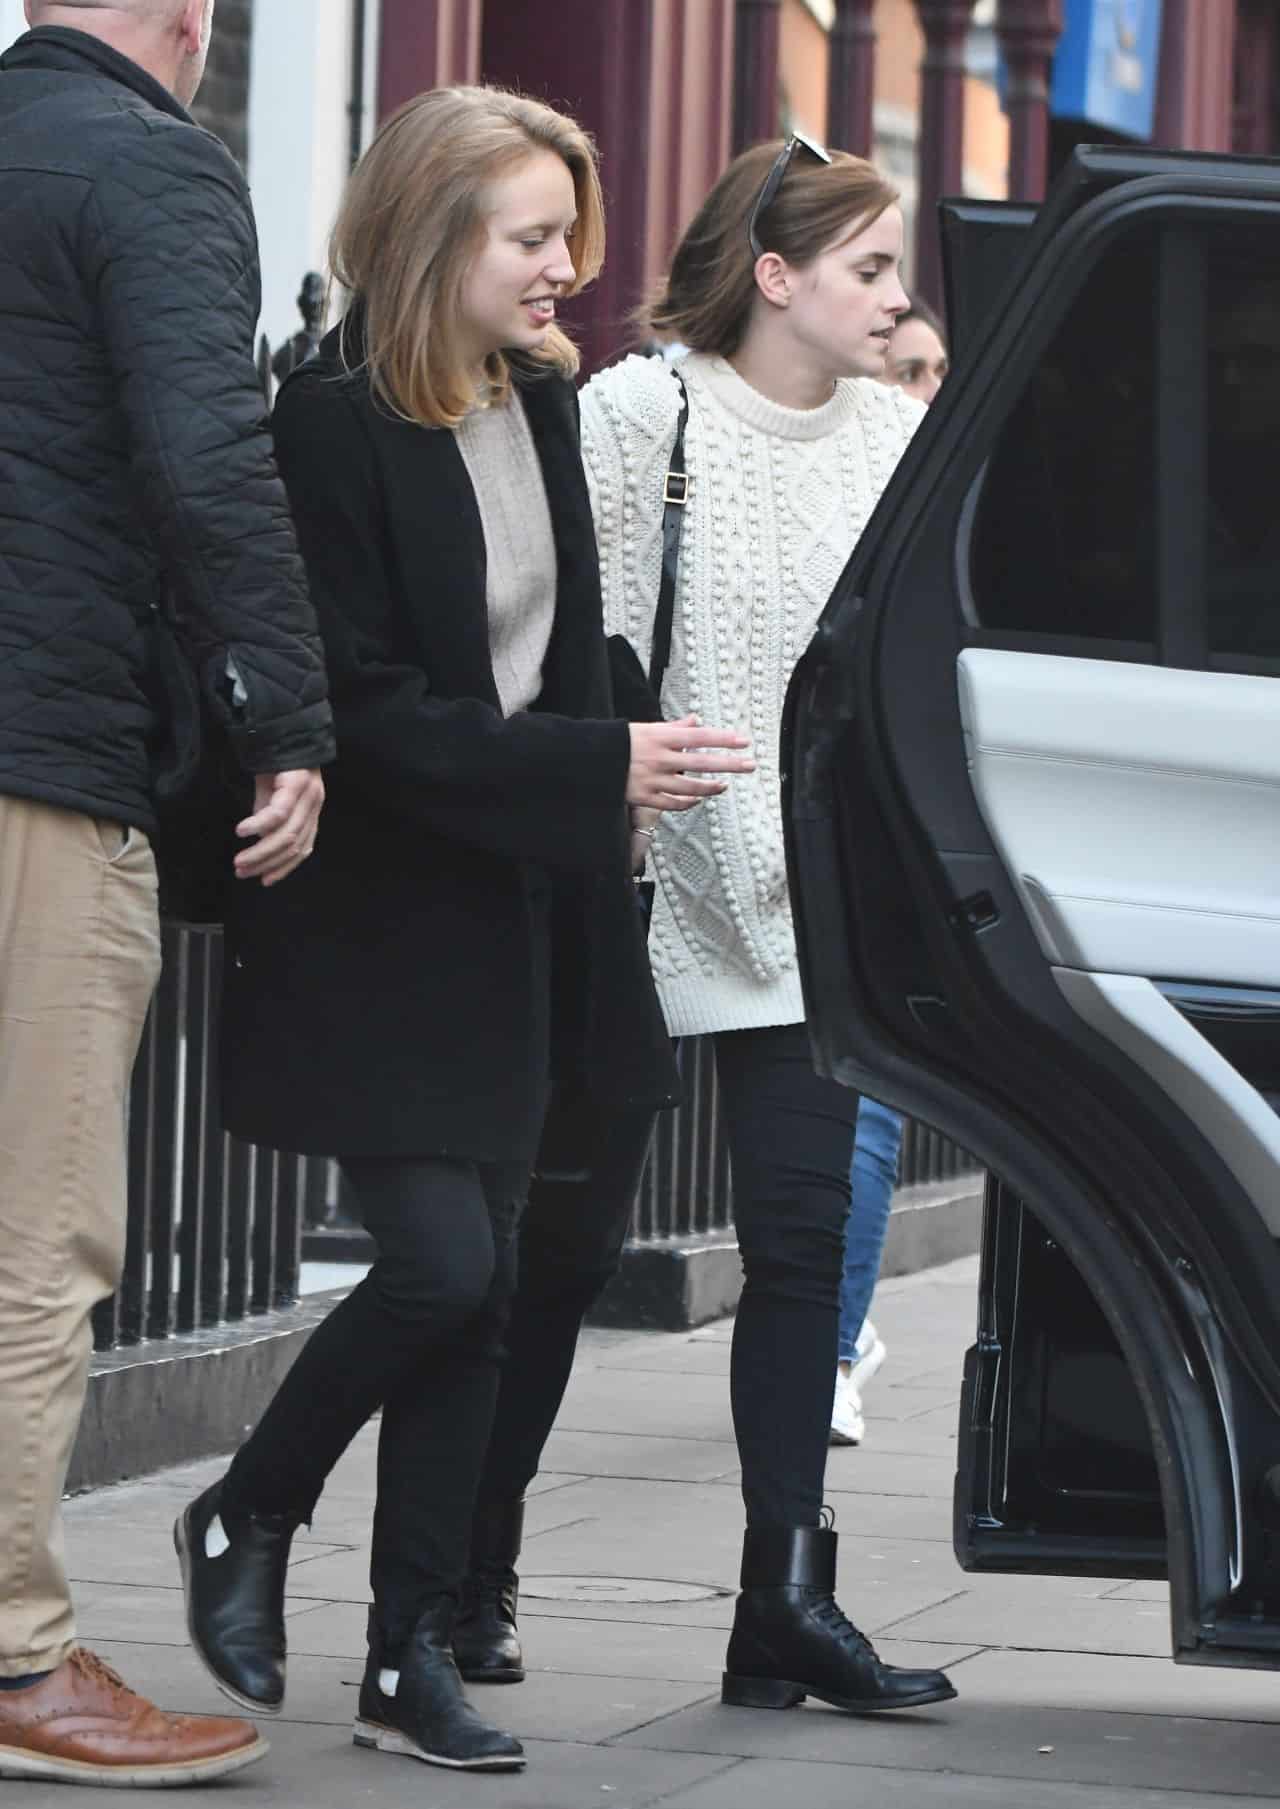 Emma Watson Looks Fantastic in a White Knitted Sweater and Black Jeans